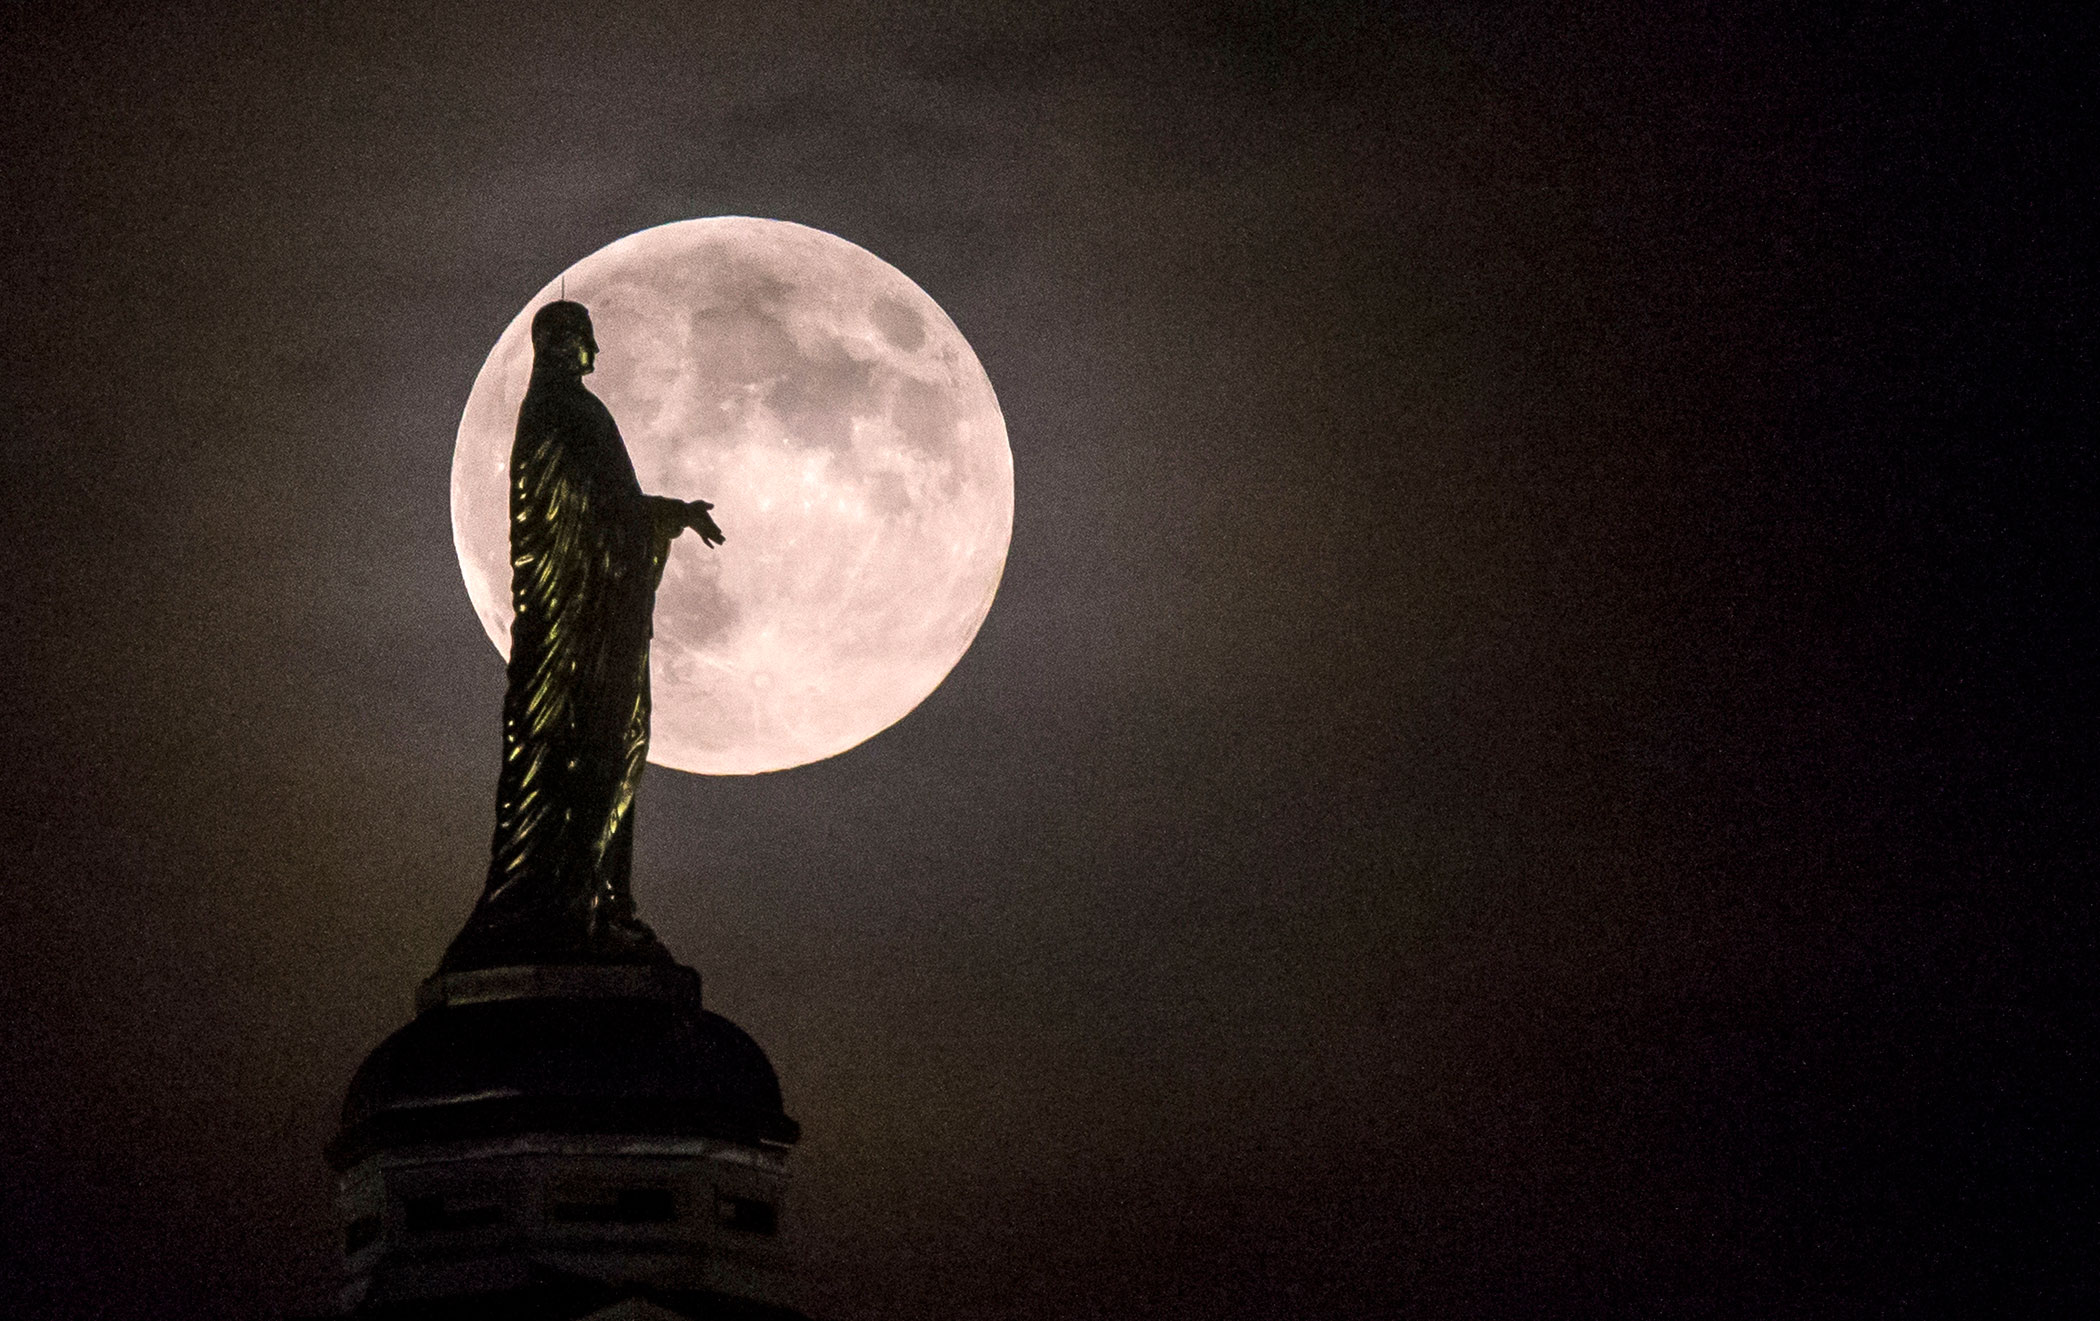 The harvest supermoon silhouettes the statue of the Virgin Mary on top the University of Notre Dame's golden dome in South Bend, Ind., on Sept. 8, 2014.